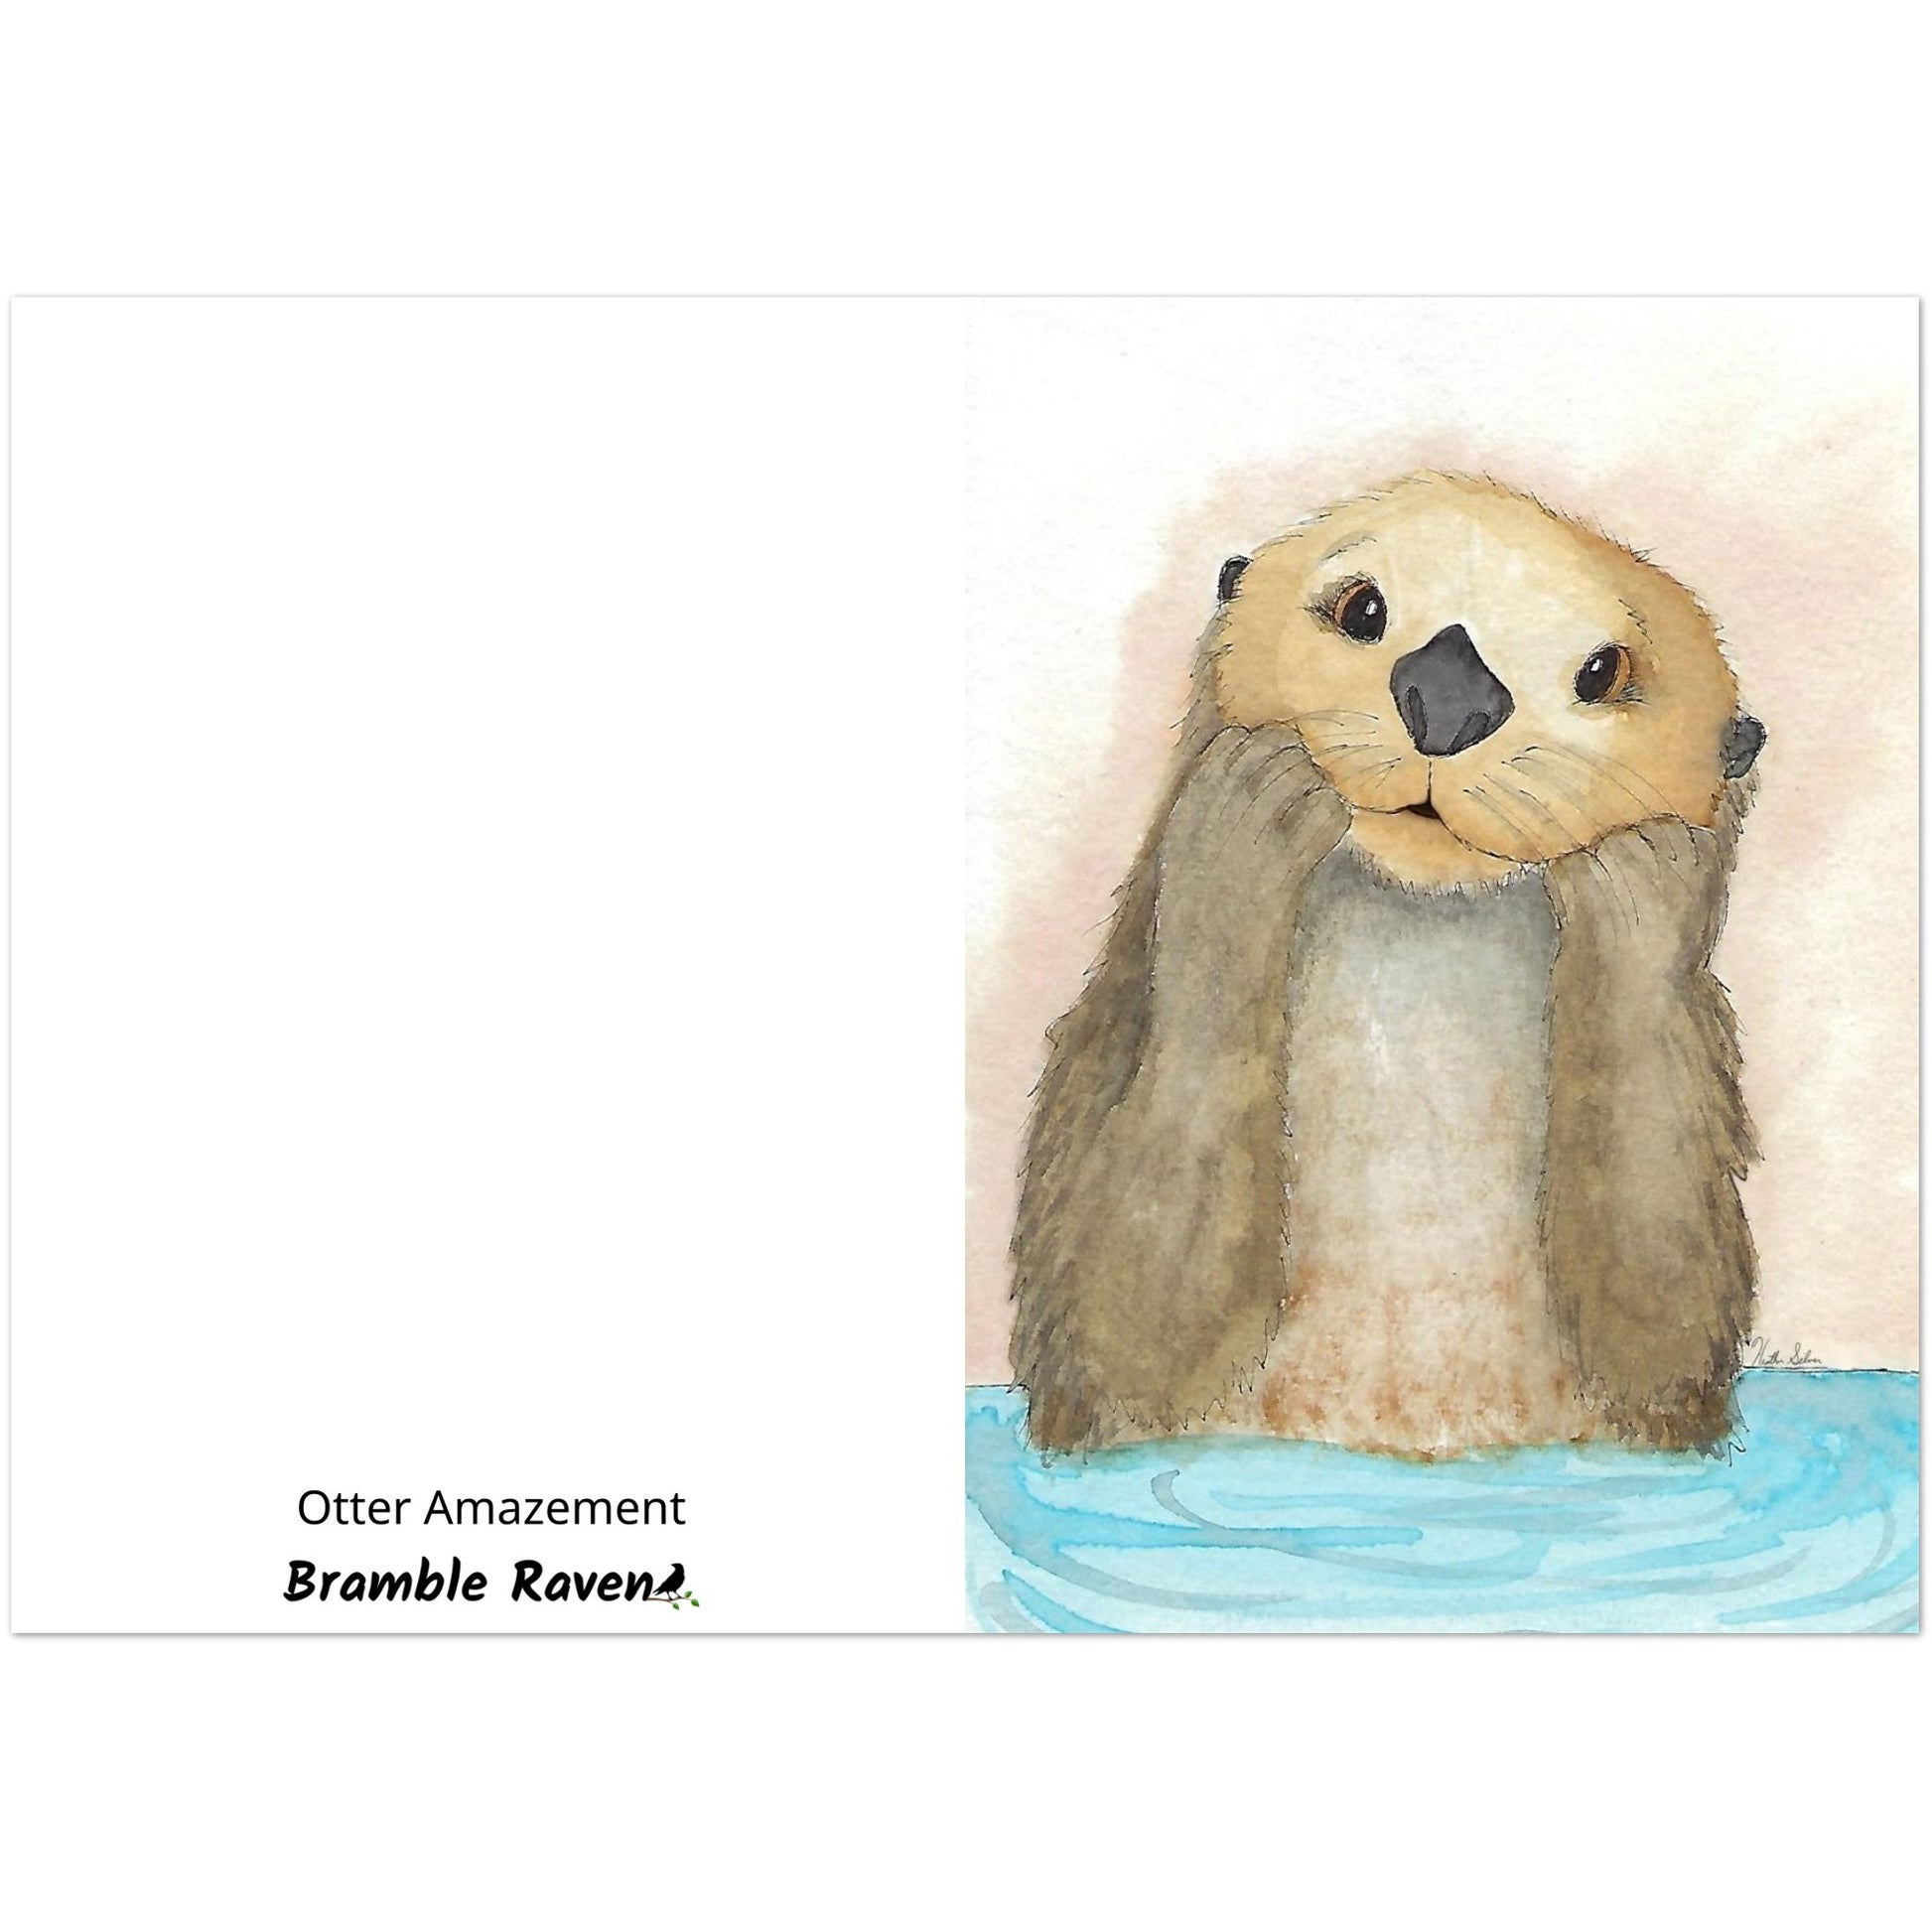 Pack of ten 5 x 7 inch greeting cards. Features watercolor print of a playful sea otter on the front. Inside is blank. Made of coated paperboard. Comes with envelopes.